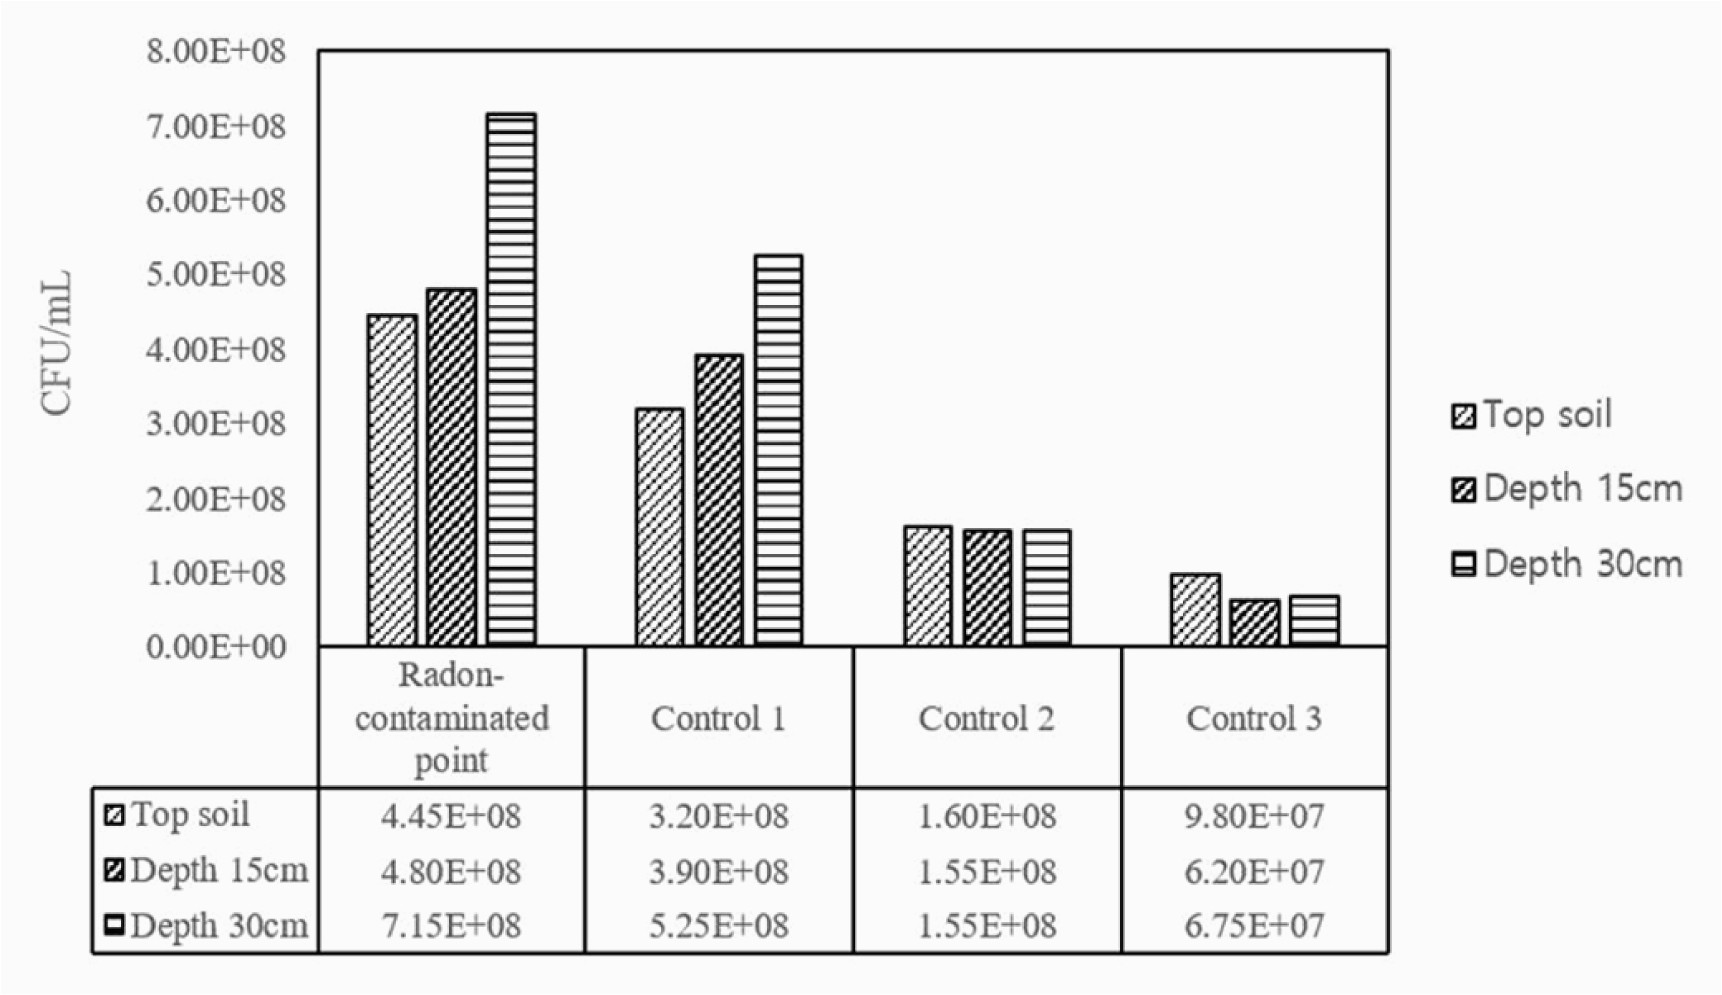 effects of radon on soil microbial community and their growth